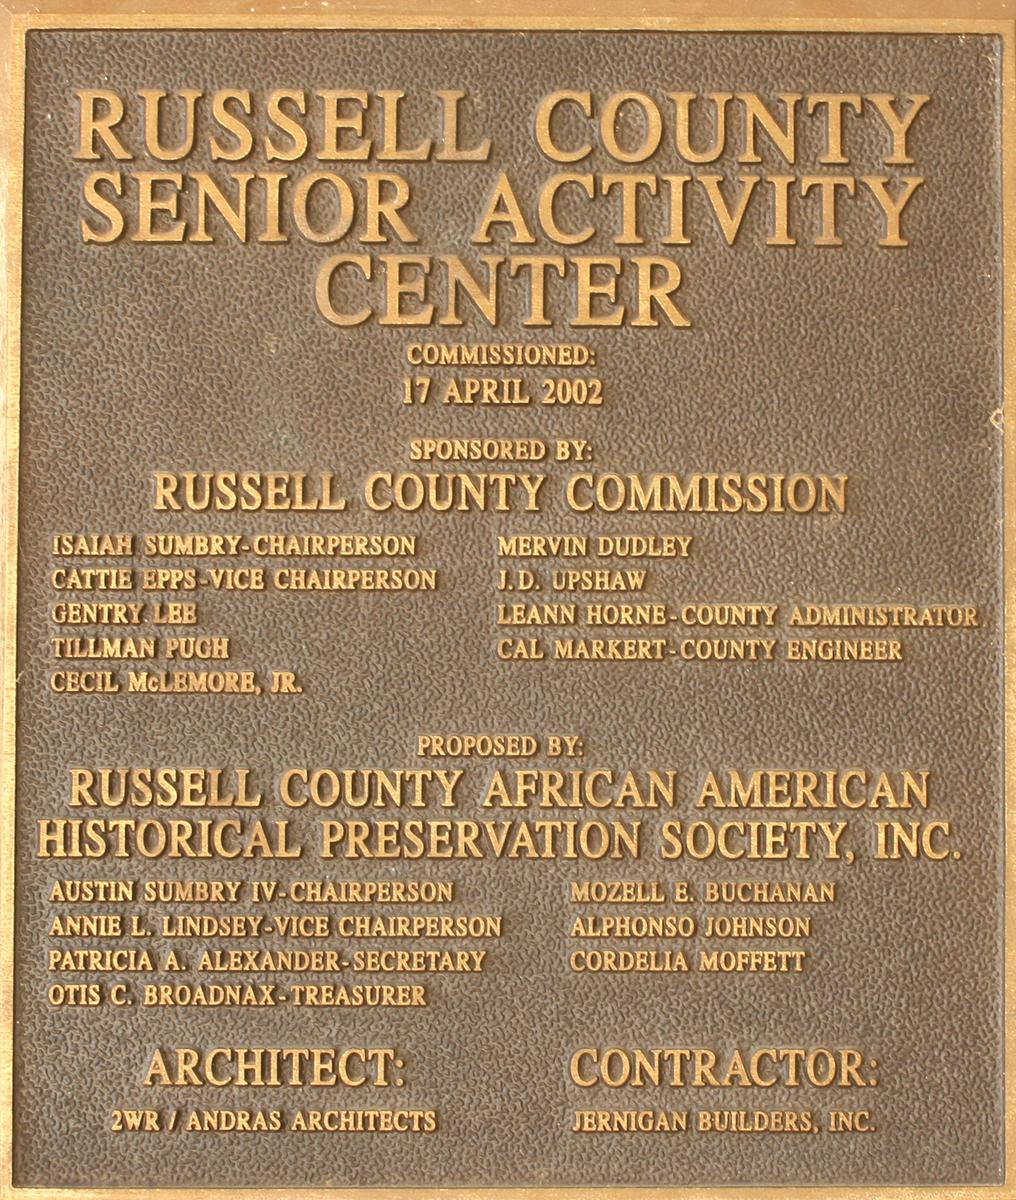 Lessee agrees to The Russell County Senior